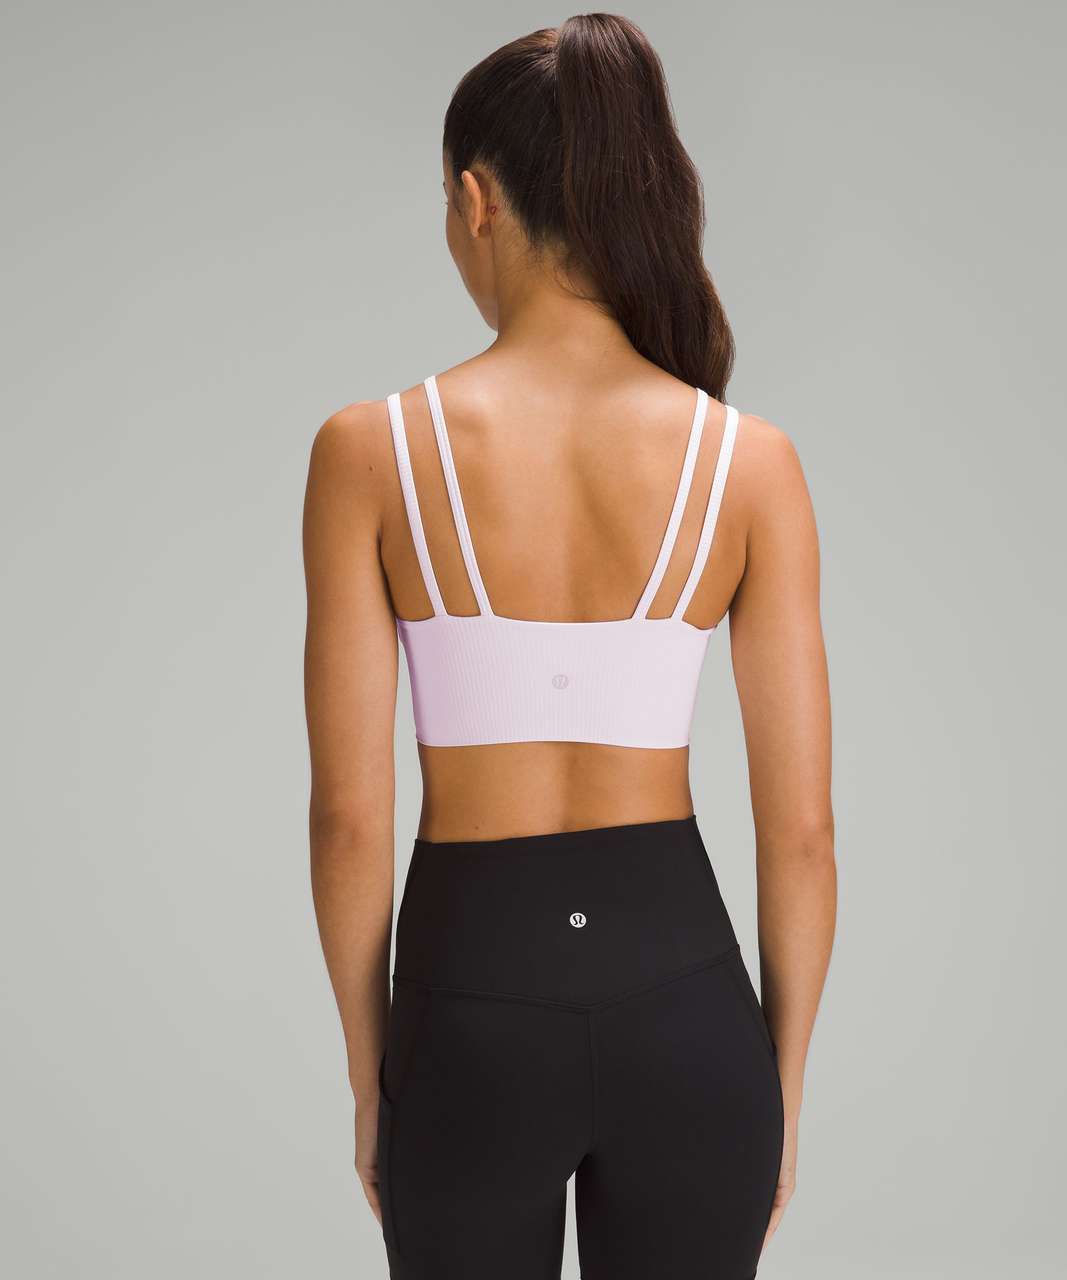 Lululemon Like a Cloud Strappy Longline Ribbed Bra *Light Support, B/C Cup - Meadowsweet Pink